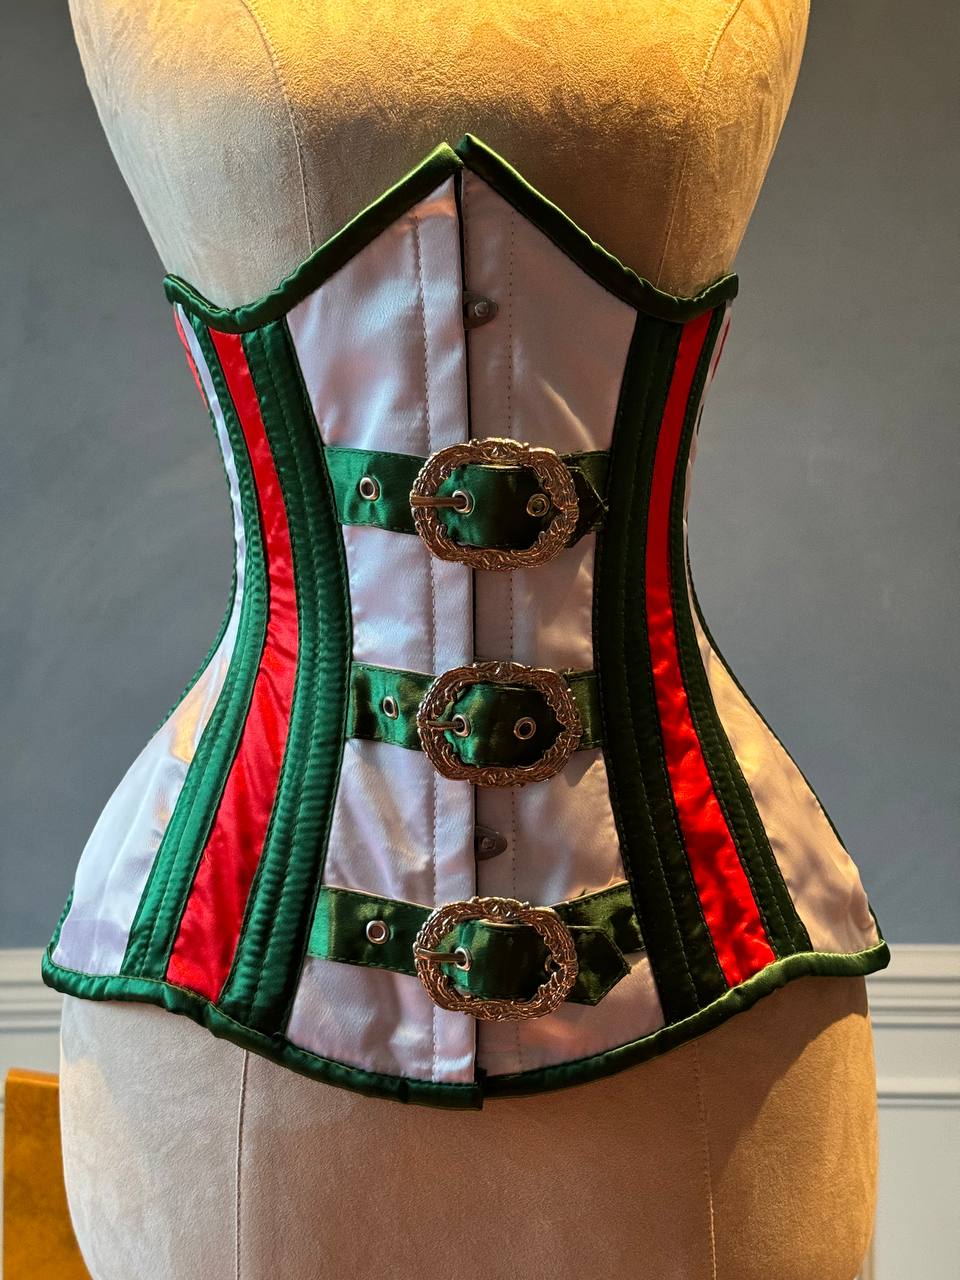 Underbust red and green satin in Santa style with steampunk closure hooks in the front. Corset is made personally according to your measurements.